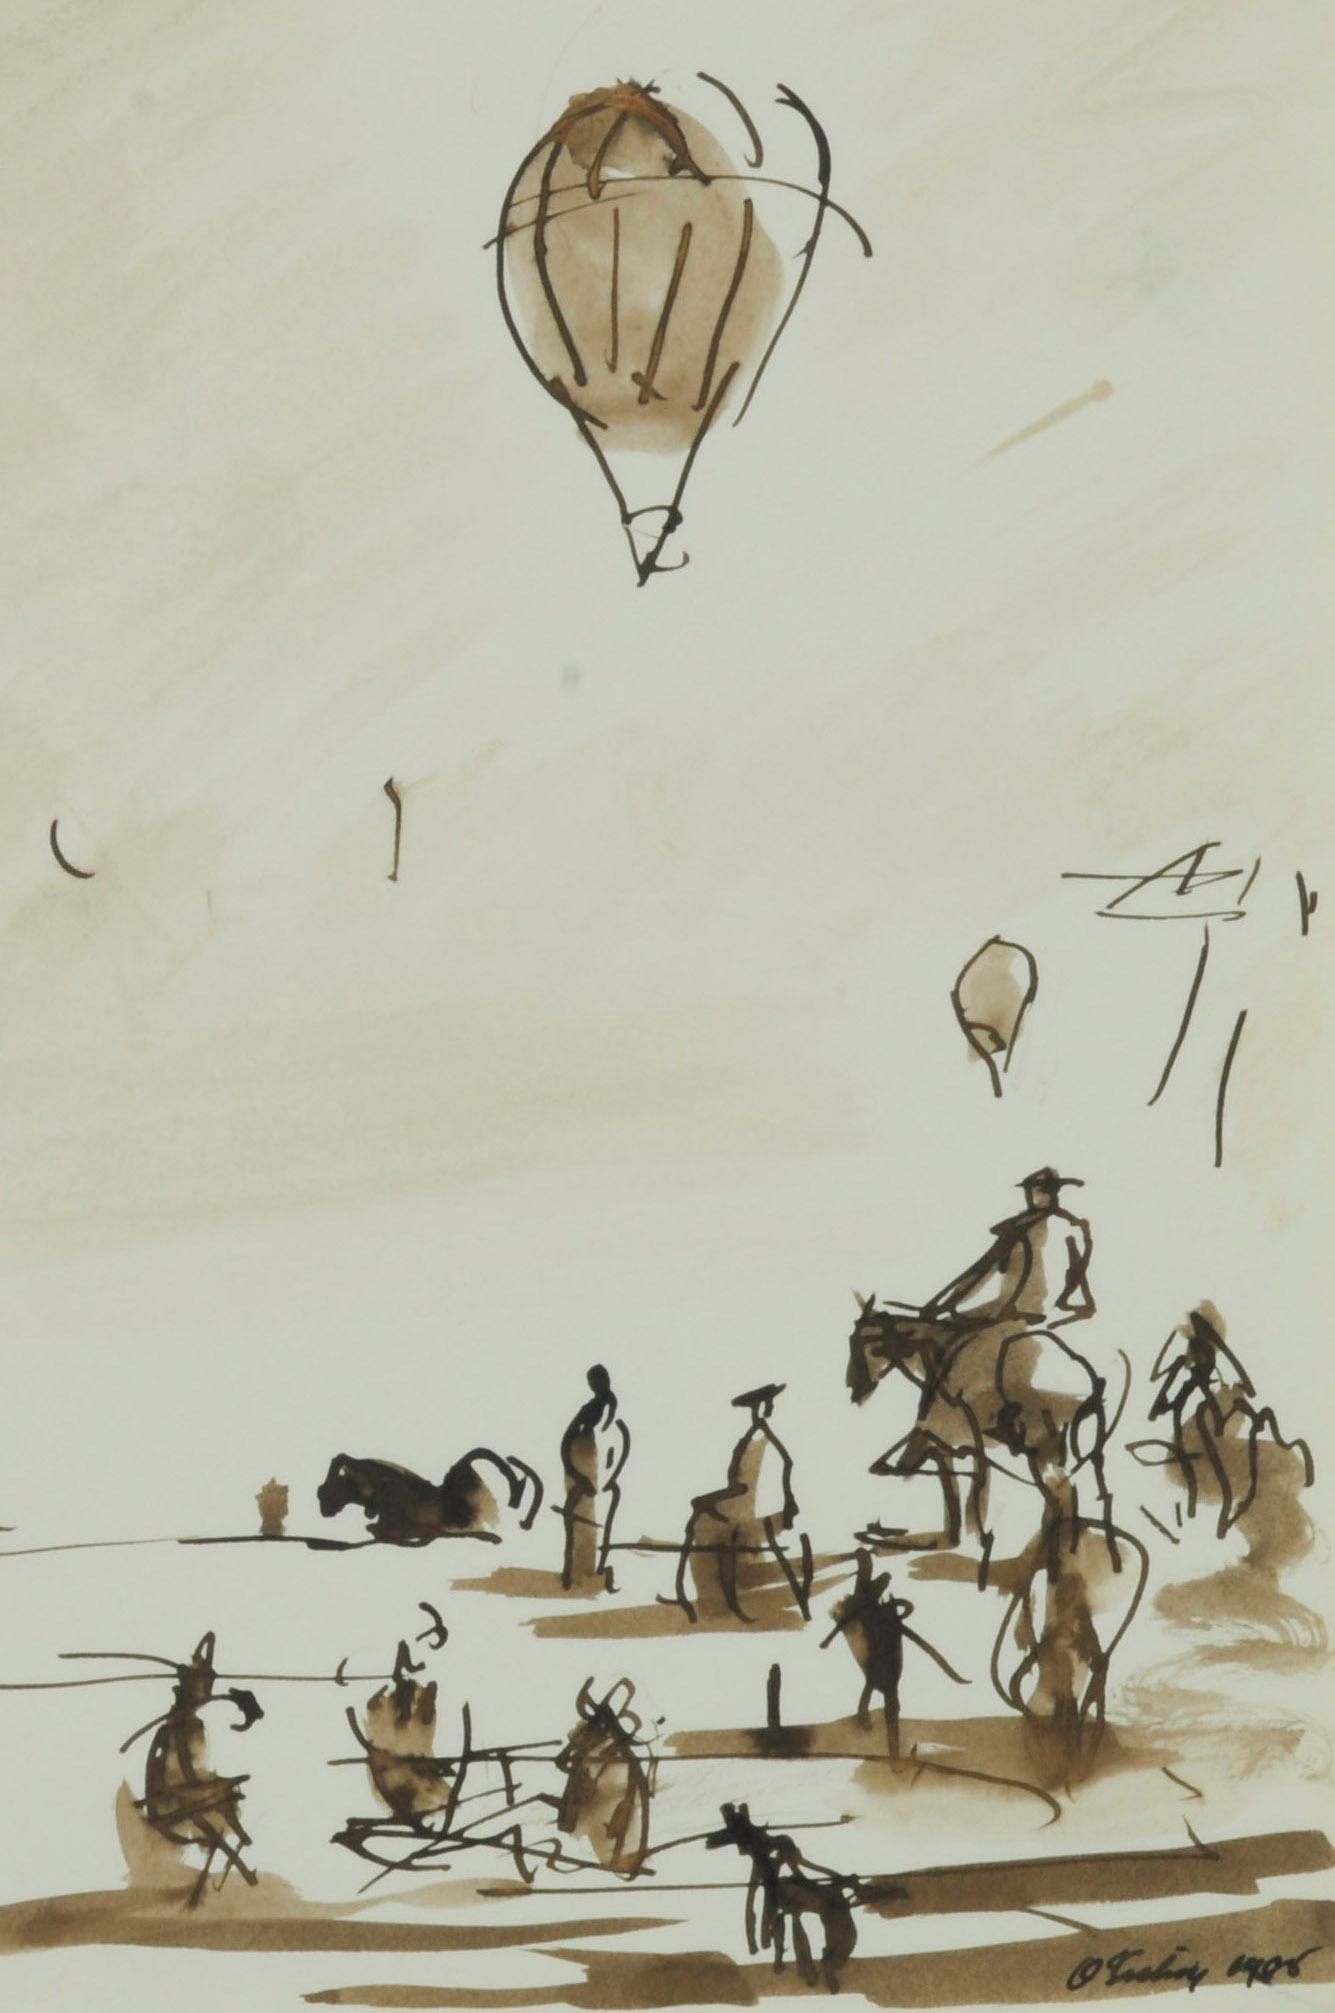 Untitled (Hot Air Balloon Ascent and Spectators)
Sepia wash on wove paper, 1985
Signed and dated in ink lower right corner
From the artist's 1985 sketchbook
Probably a view of Cape Cod, done while visiting the Lichtenstein's
Provenance; Estate of